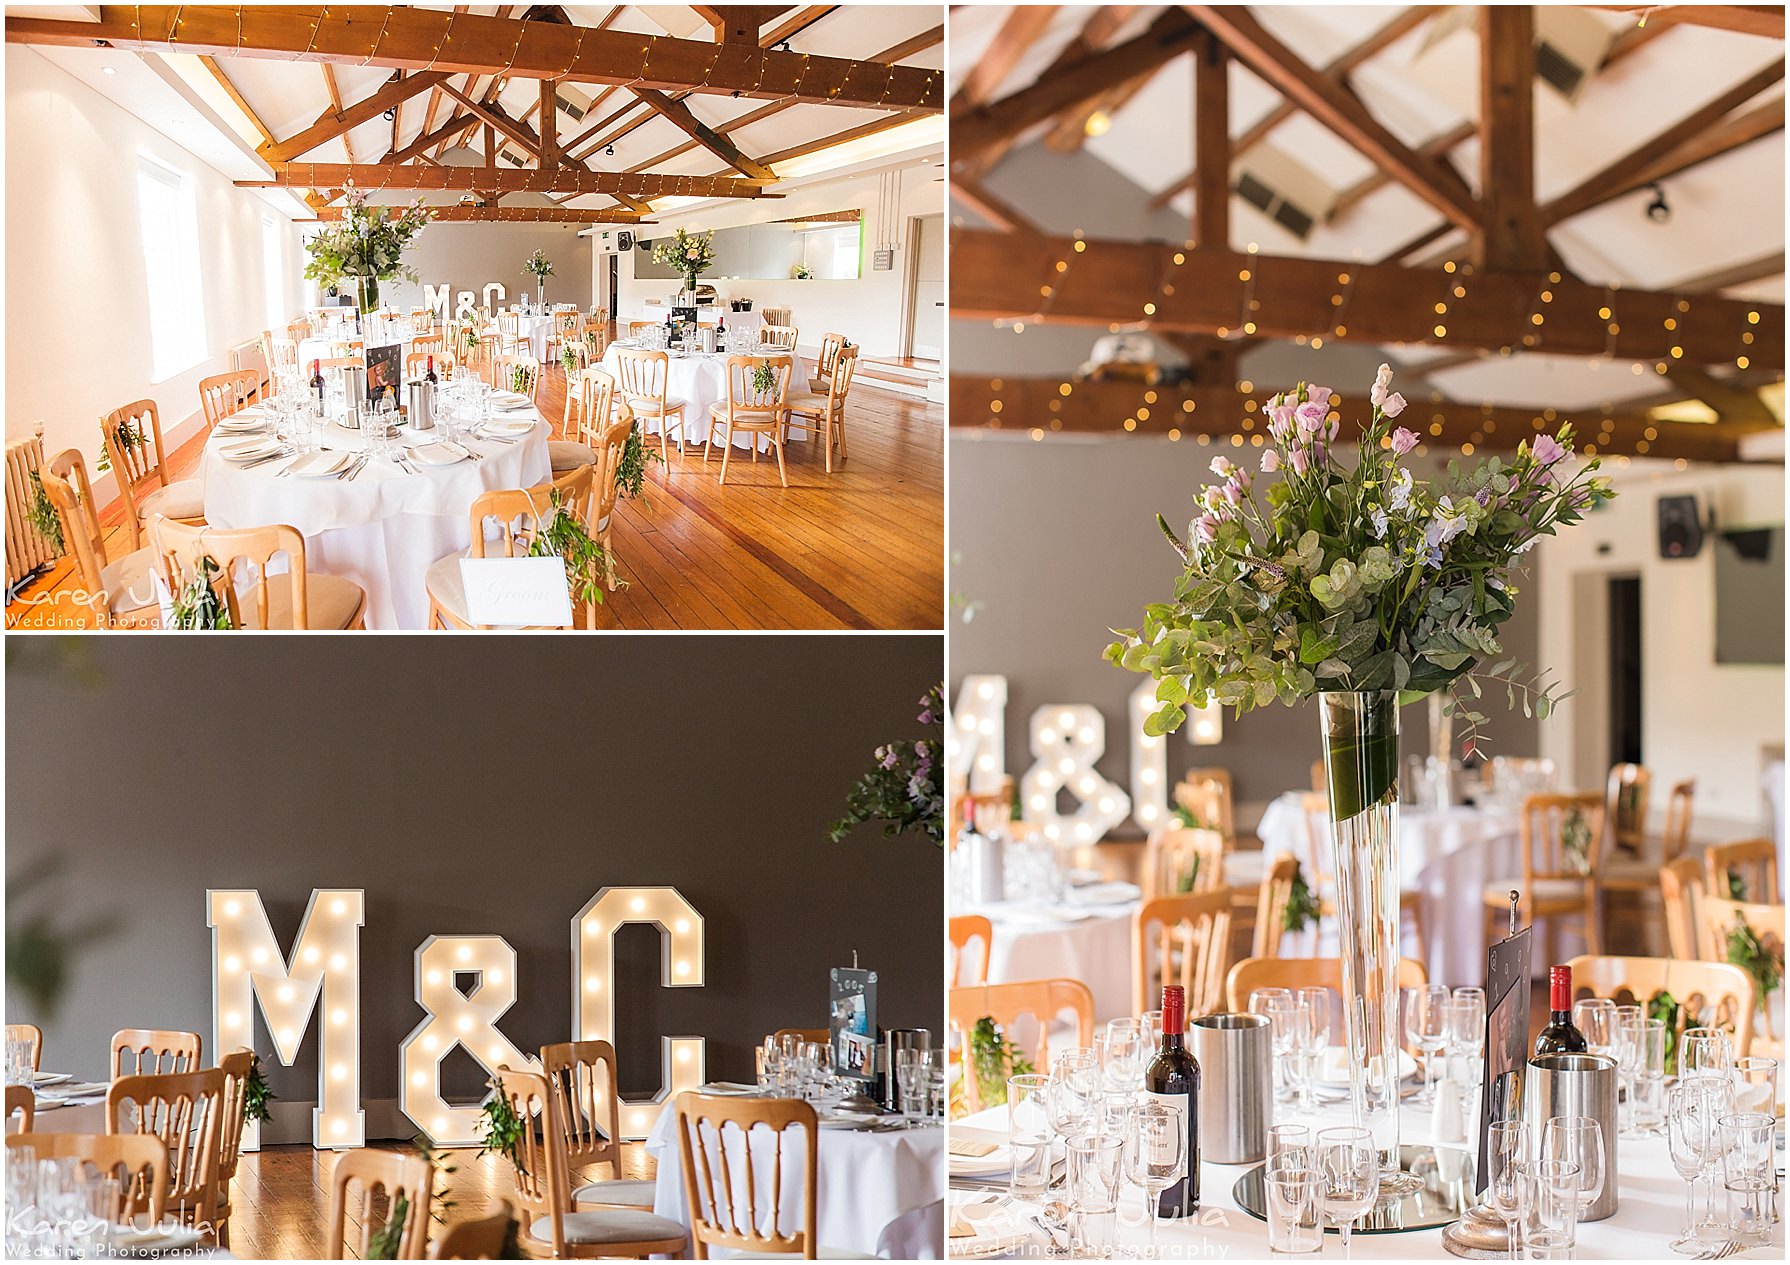 The Brindley Room decorated in a rustic floral theme with wooden chairs